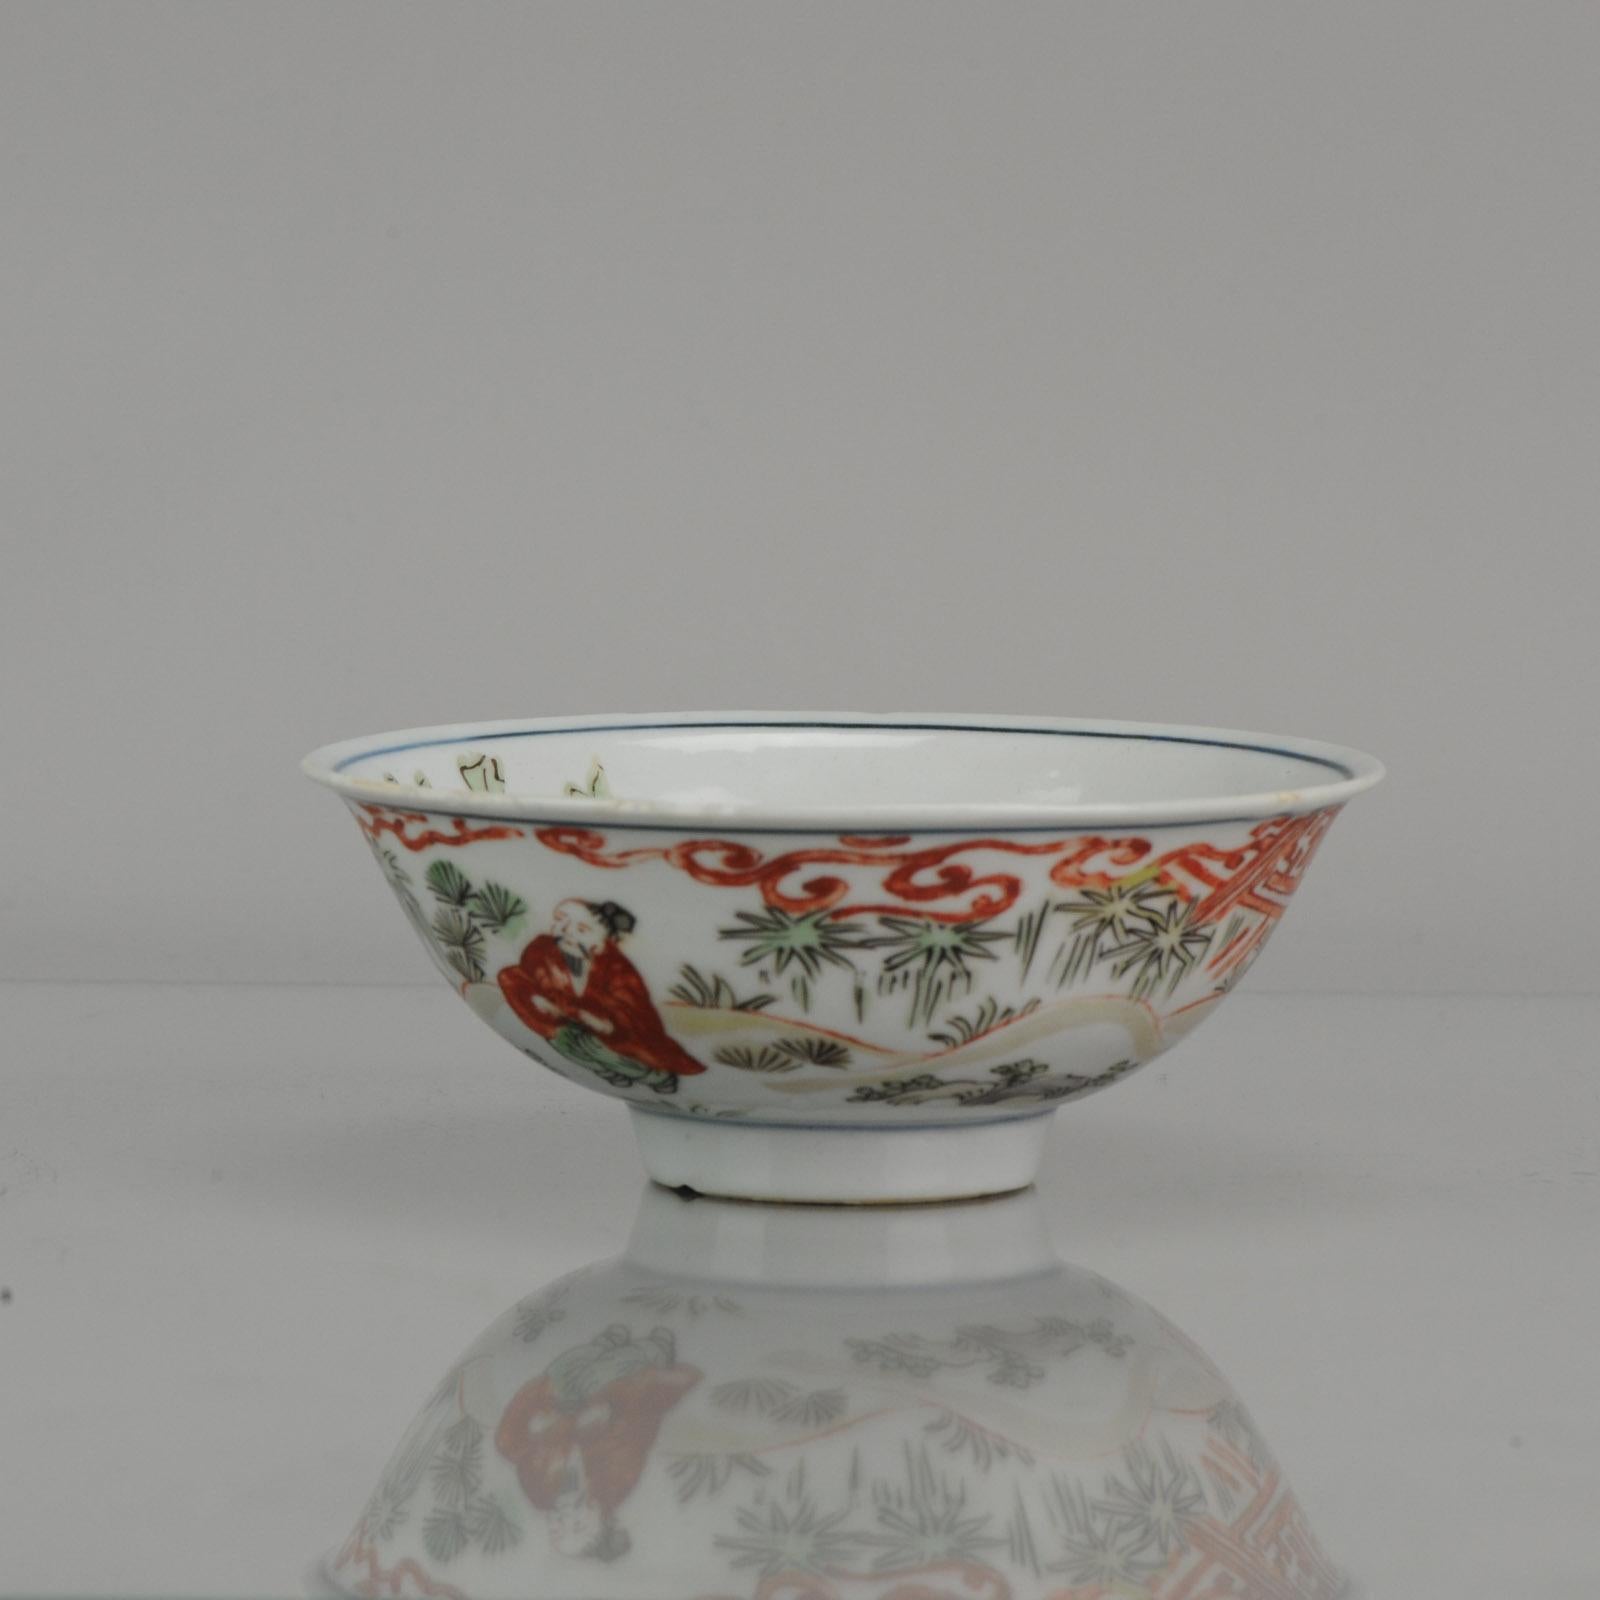 18th Century and Earlier Antique Chinese Porcelain Bowl Ko-Akae Famille Verte Marked Figures in For Sale